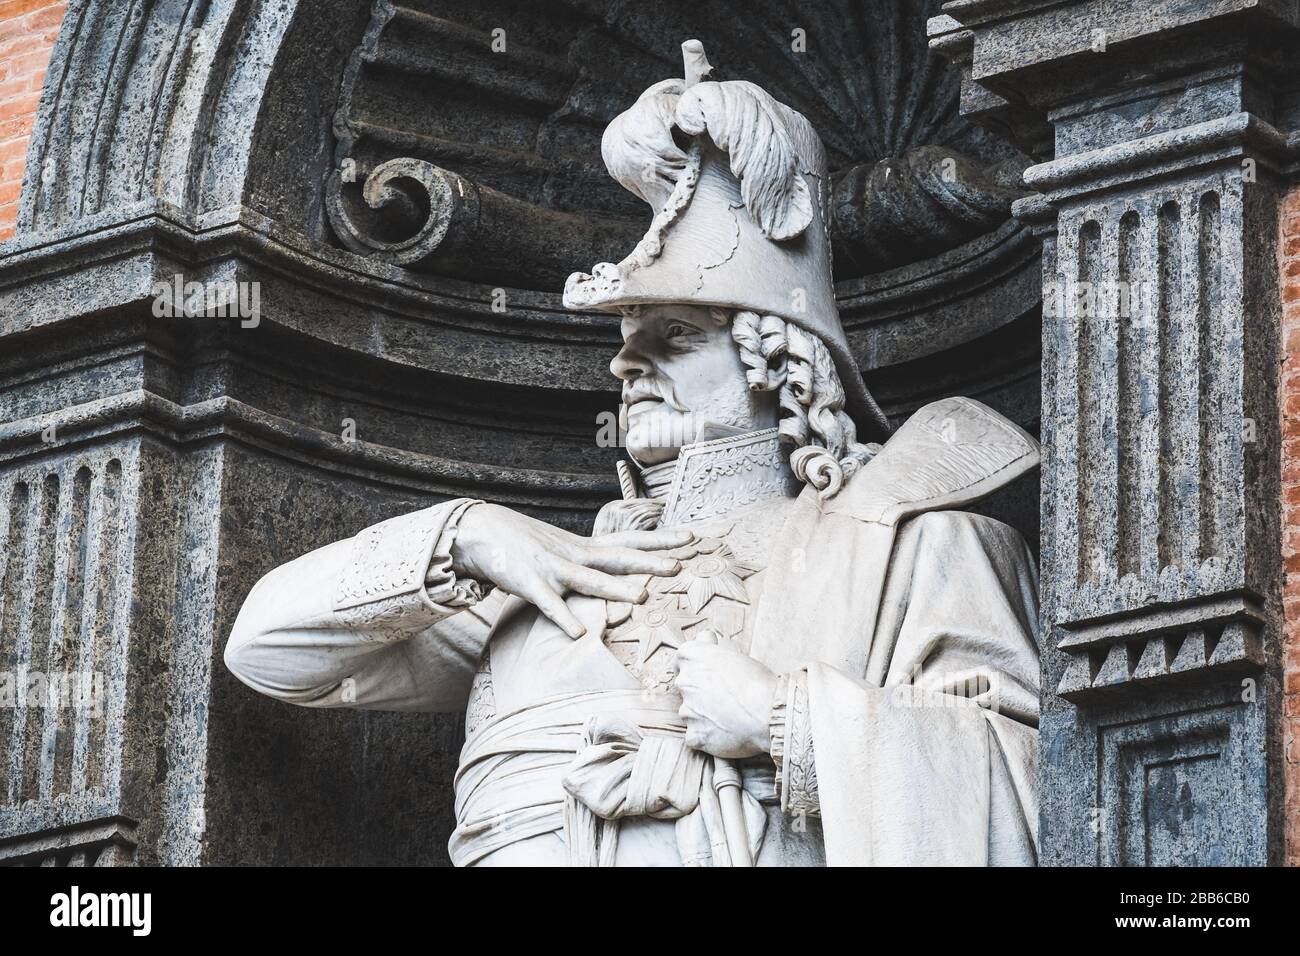 Gioacchino Murat statue at the entrance of Royal Palace in Naples, King of Naples from 1808 to 181, sculpted by Giovan Battista Amendola in 1880. Stock Photo